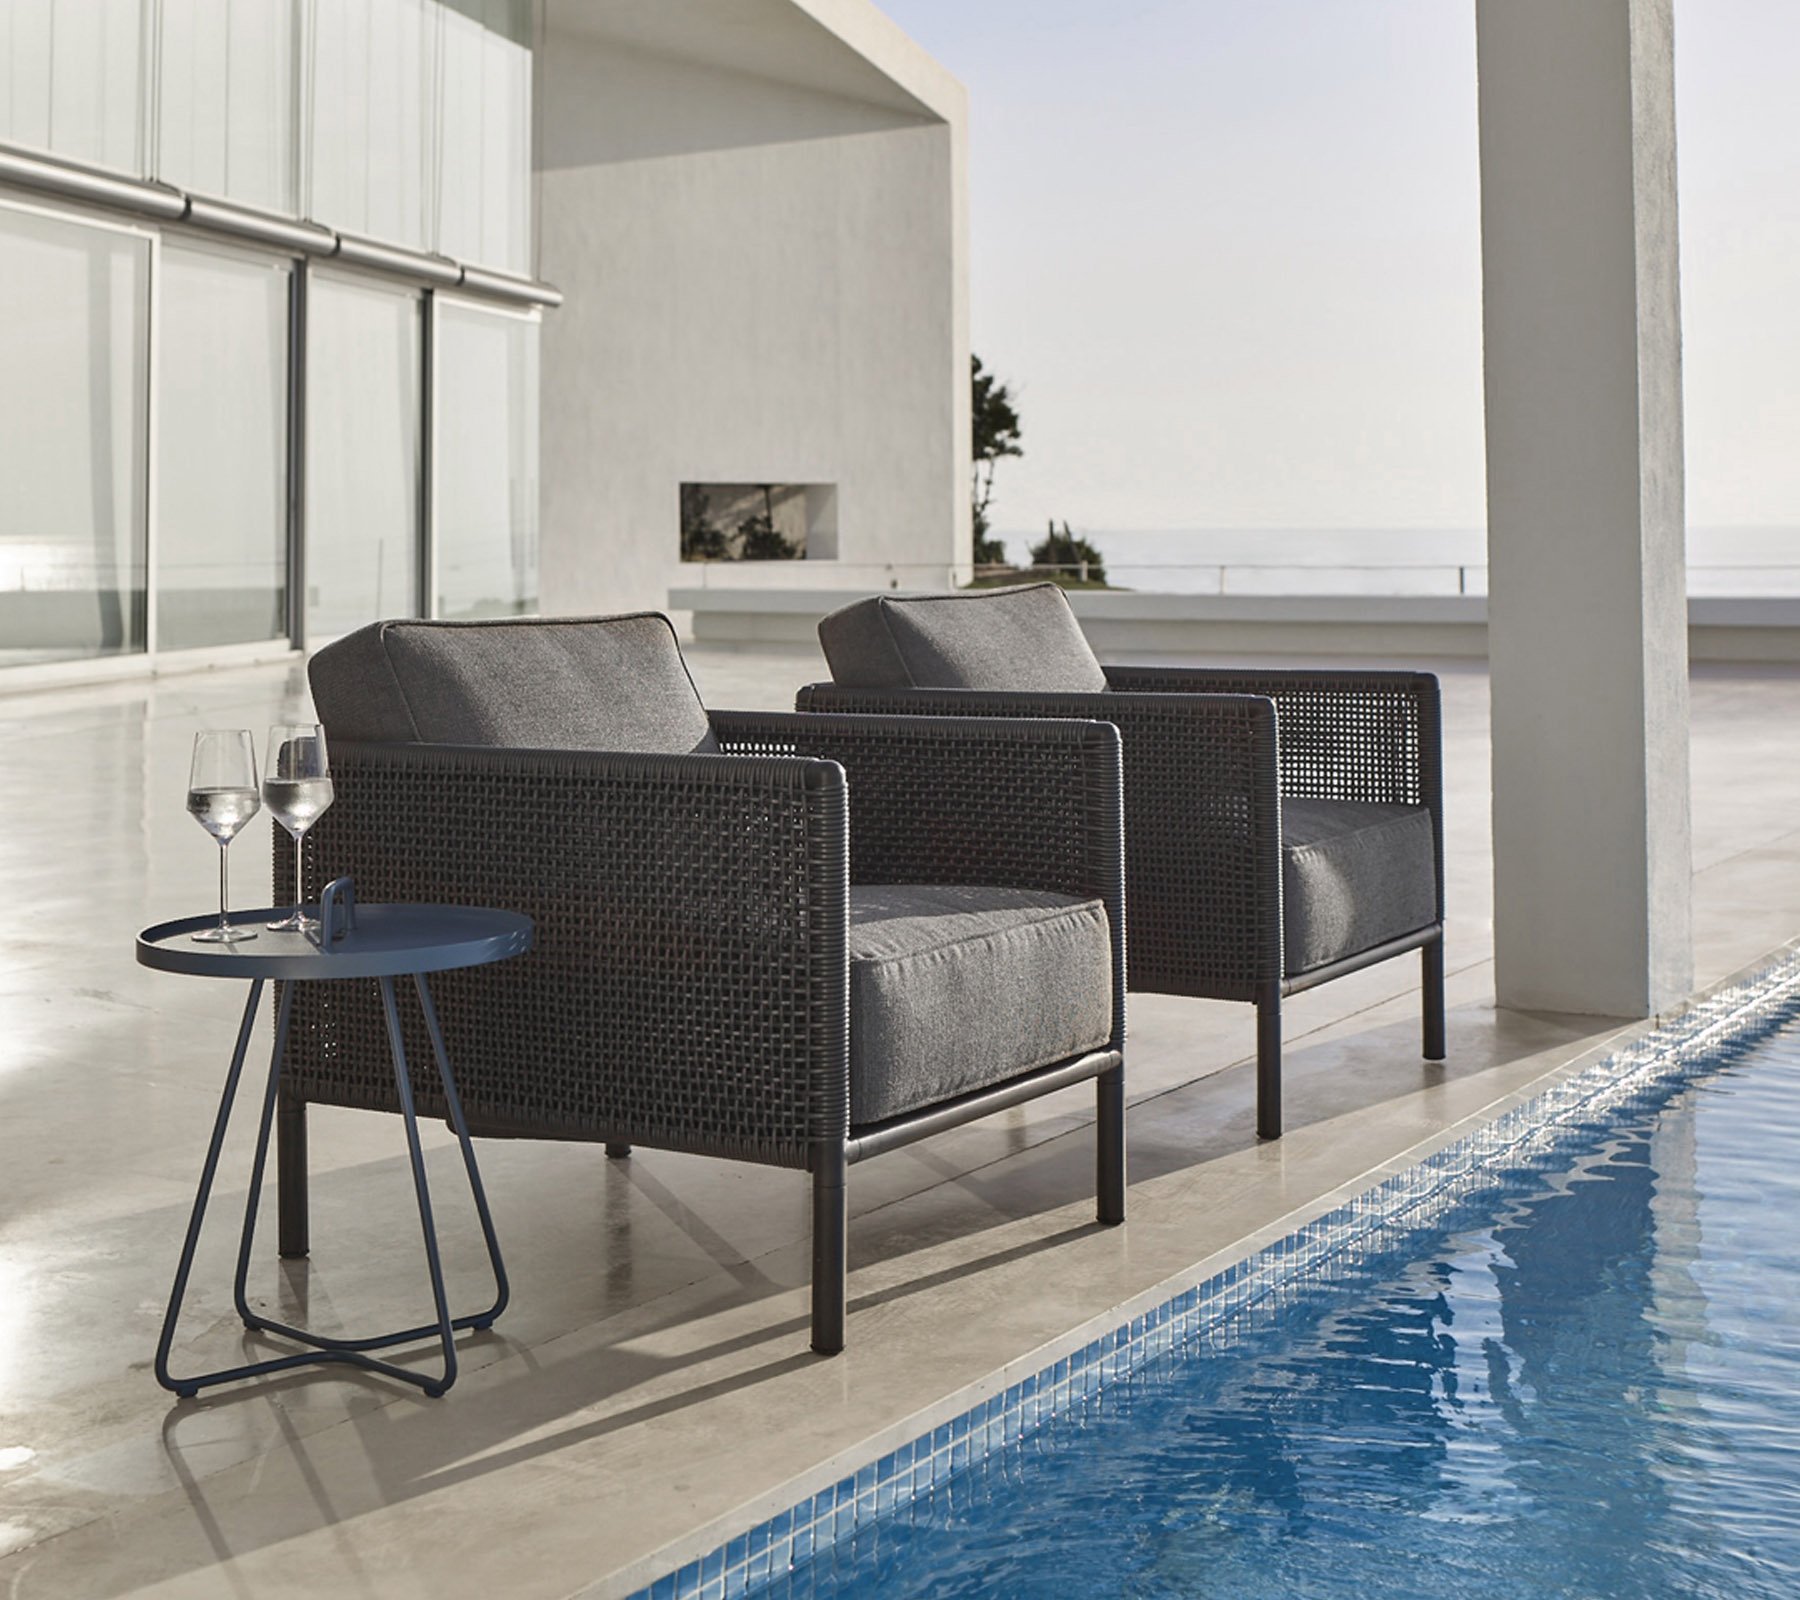 Cane-line Encore Lounge Chair | Wooden | Outdoor-Patio Furniture ...